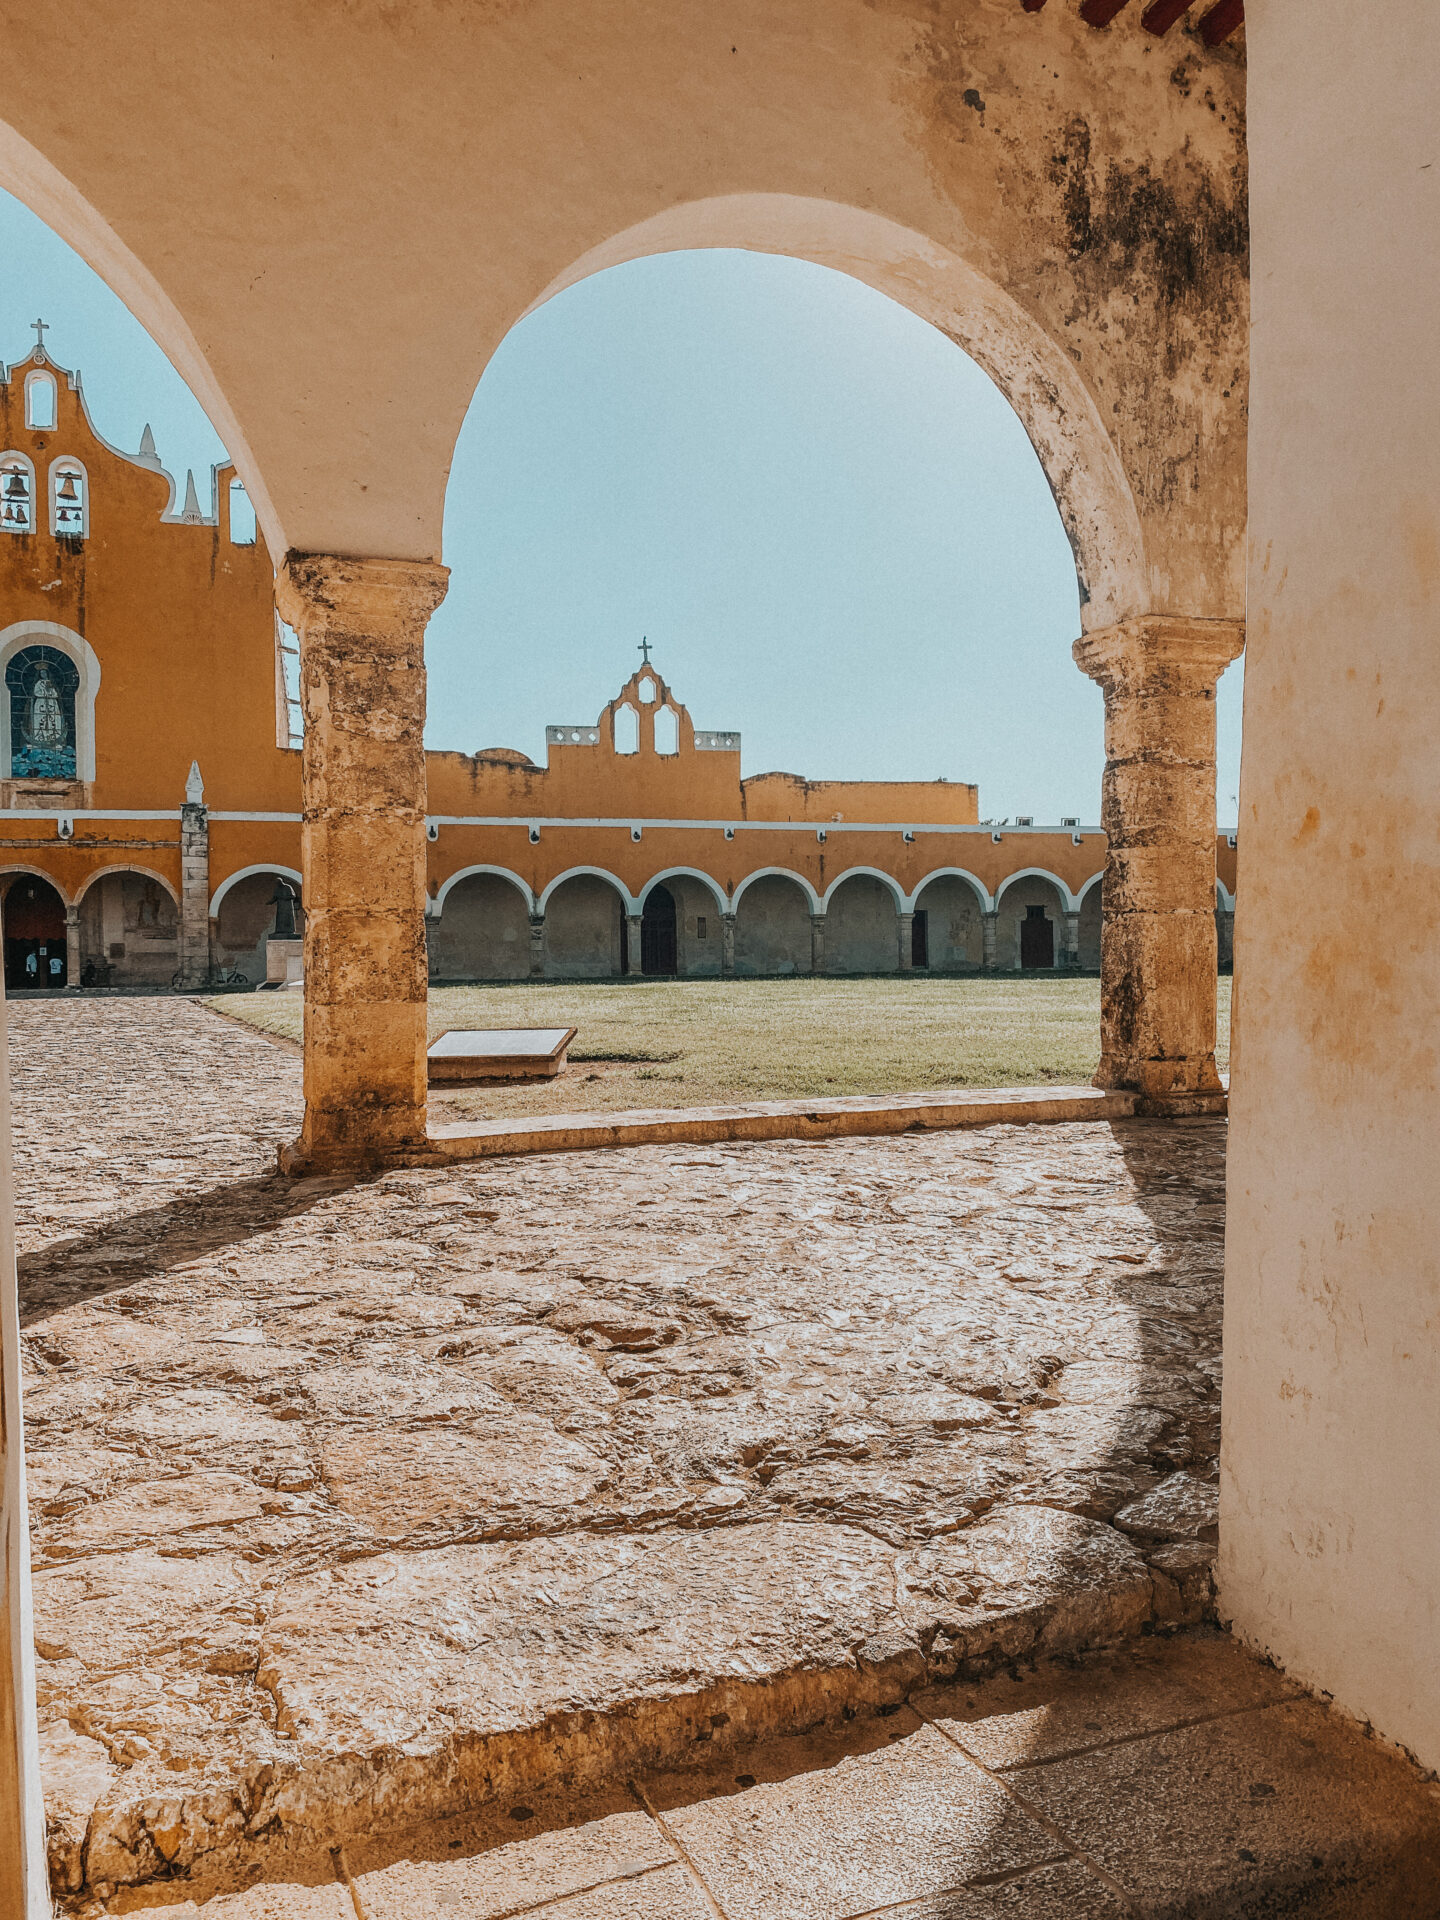 Things to do in Izamal, Mexico